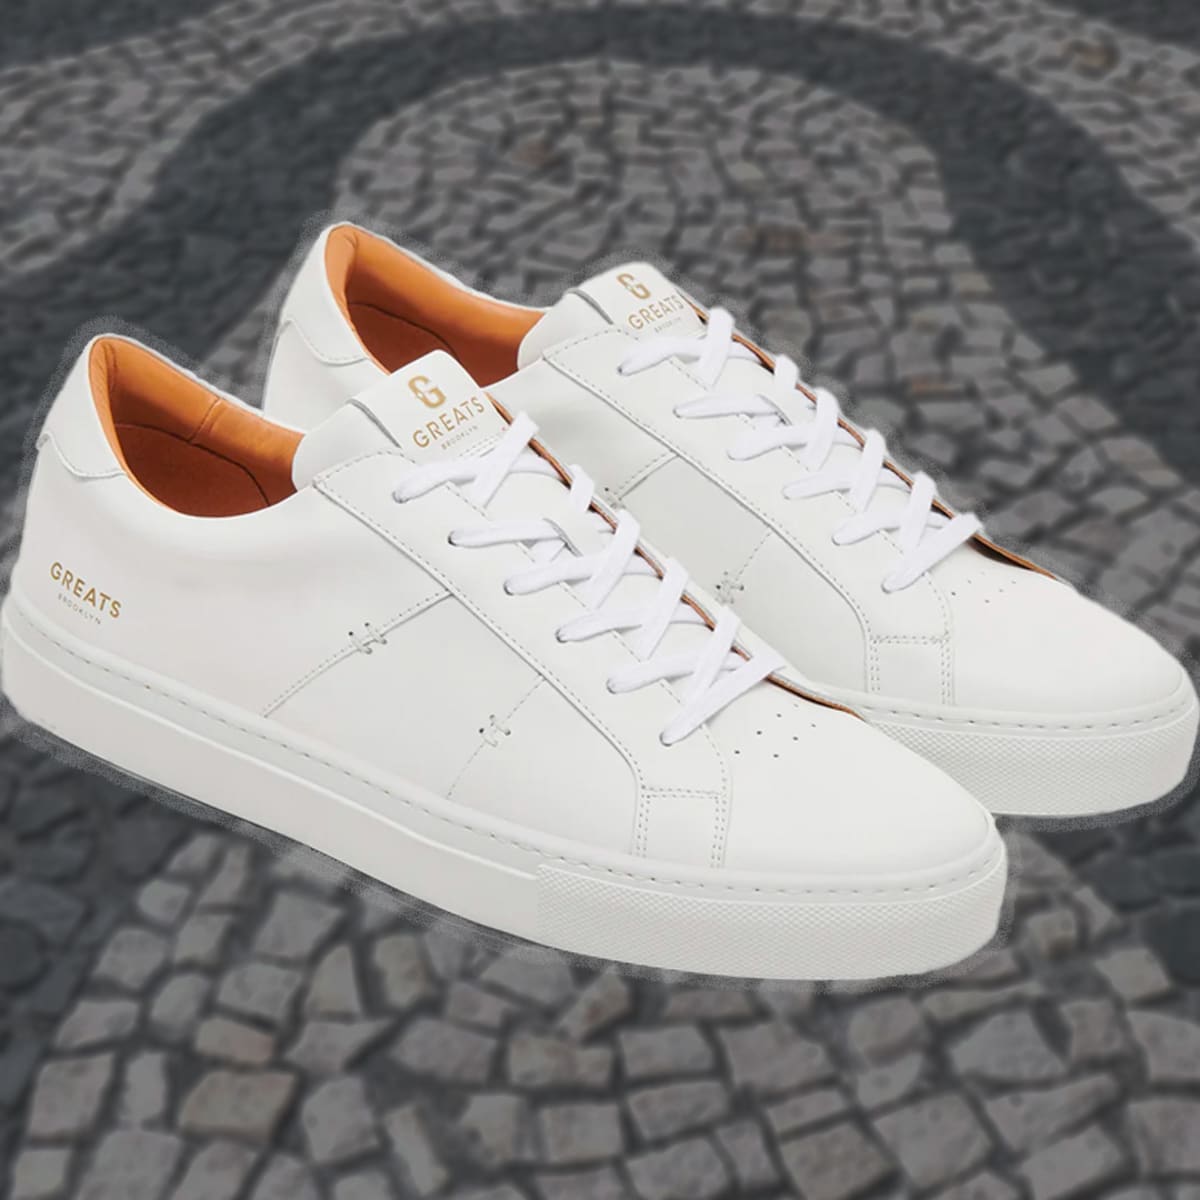 GREATS Royale Sneaker | Urban Outfitters Mexico - Clothing, Music, Home &  Accessories